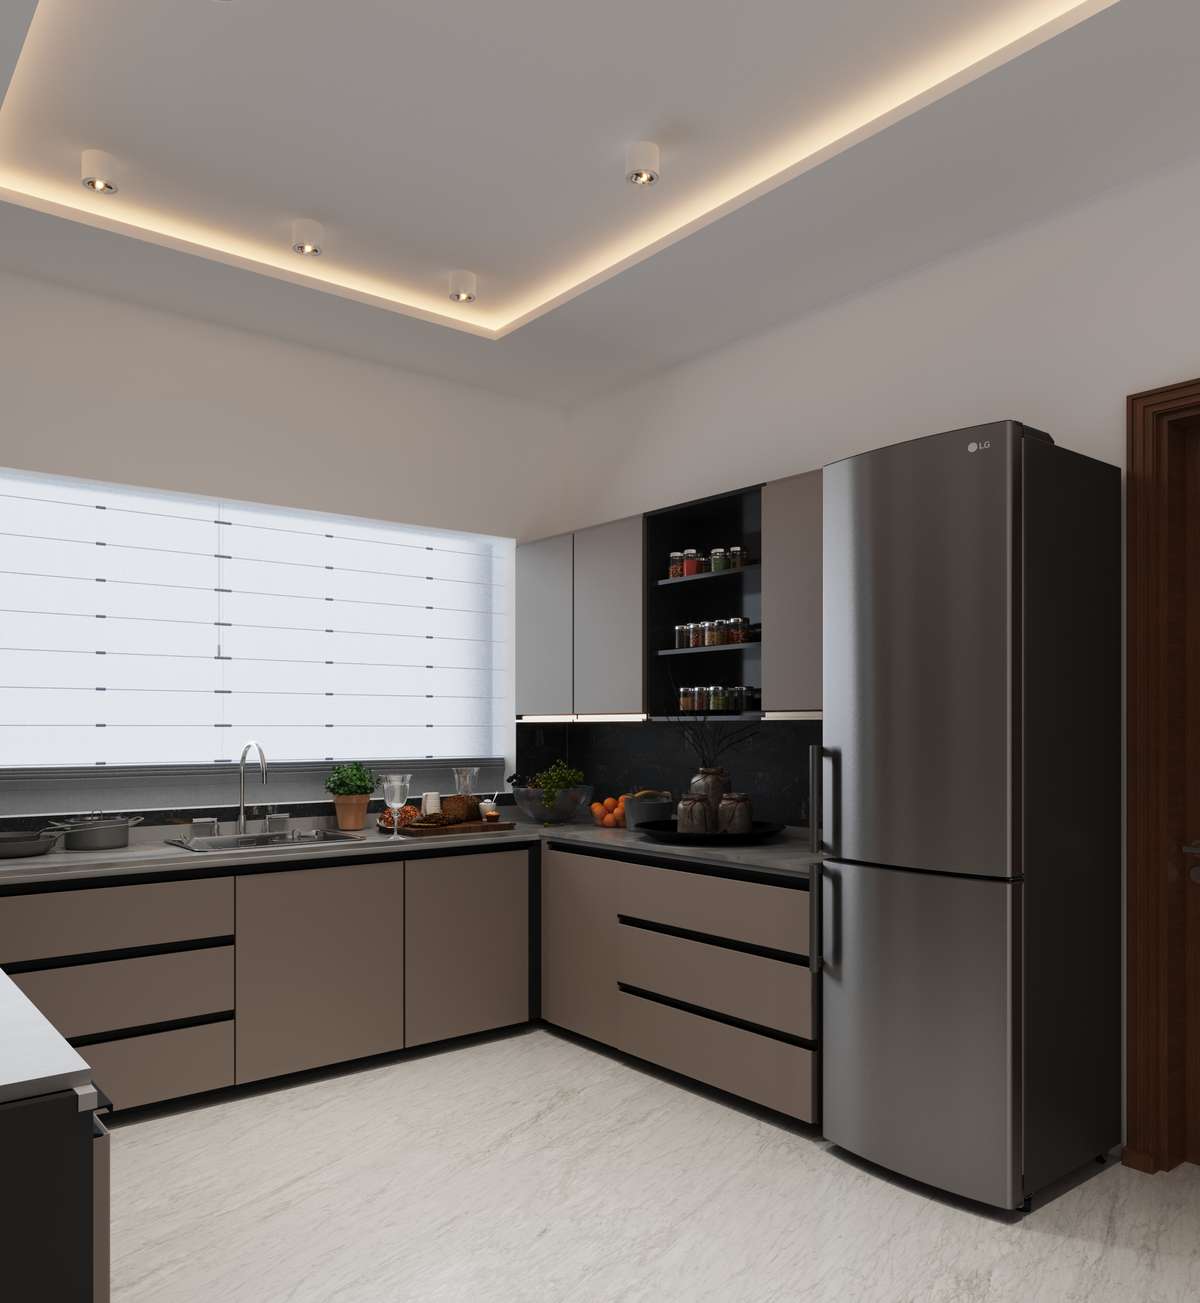 Ceiling, Lighting, Kitchen, Storage Designs by 3D & CAD Faa sthaayi, Kozhikode | Kolo